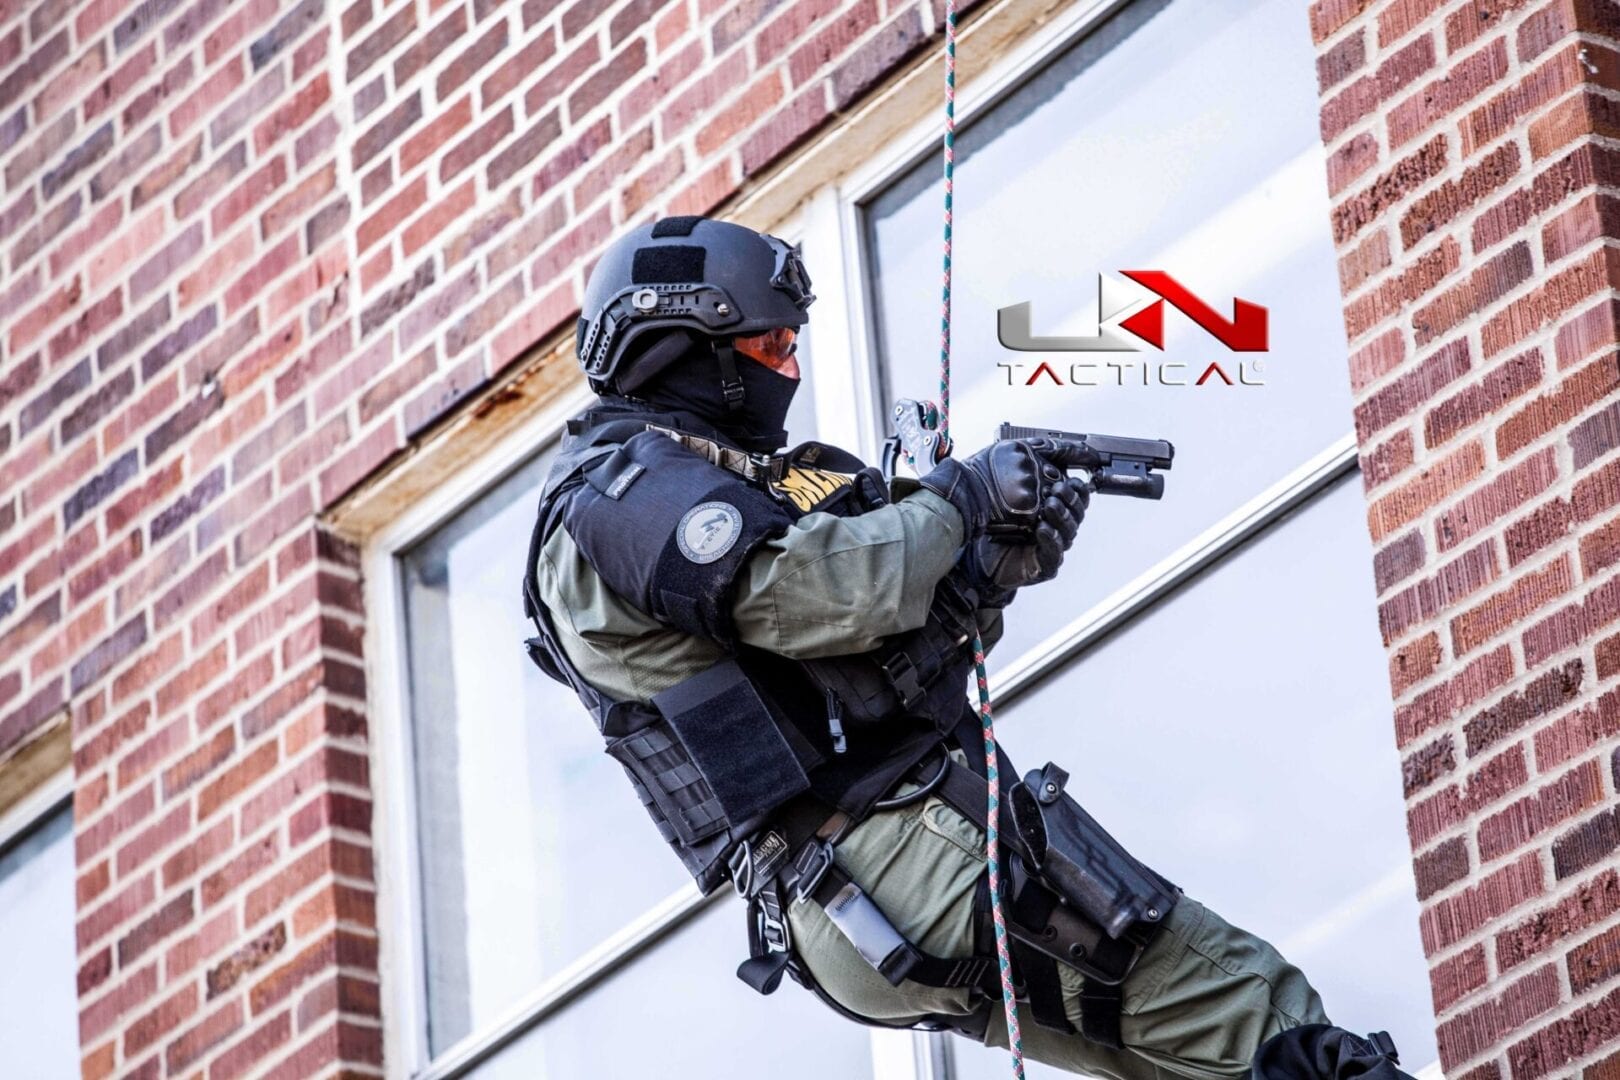 A police officer is climbing a building with a gun.